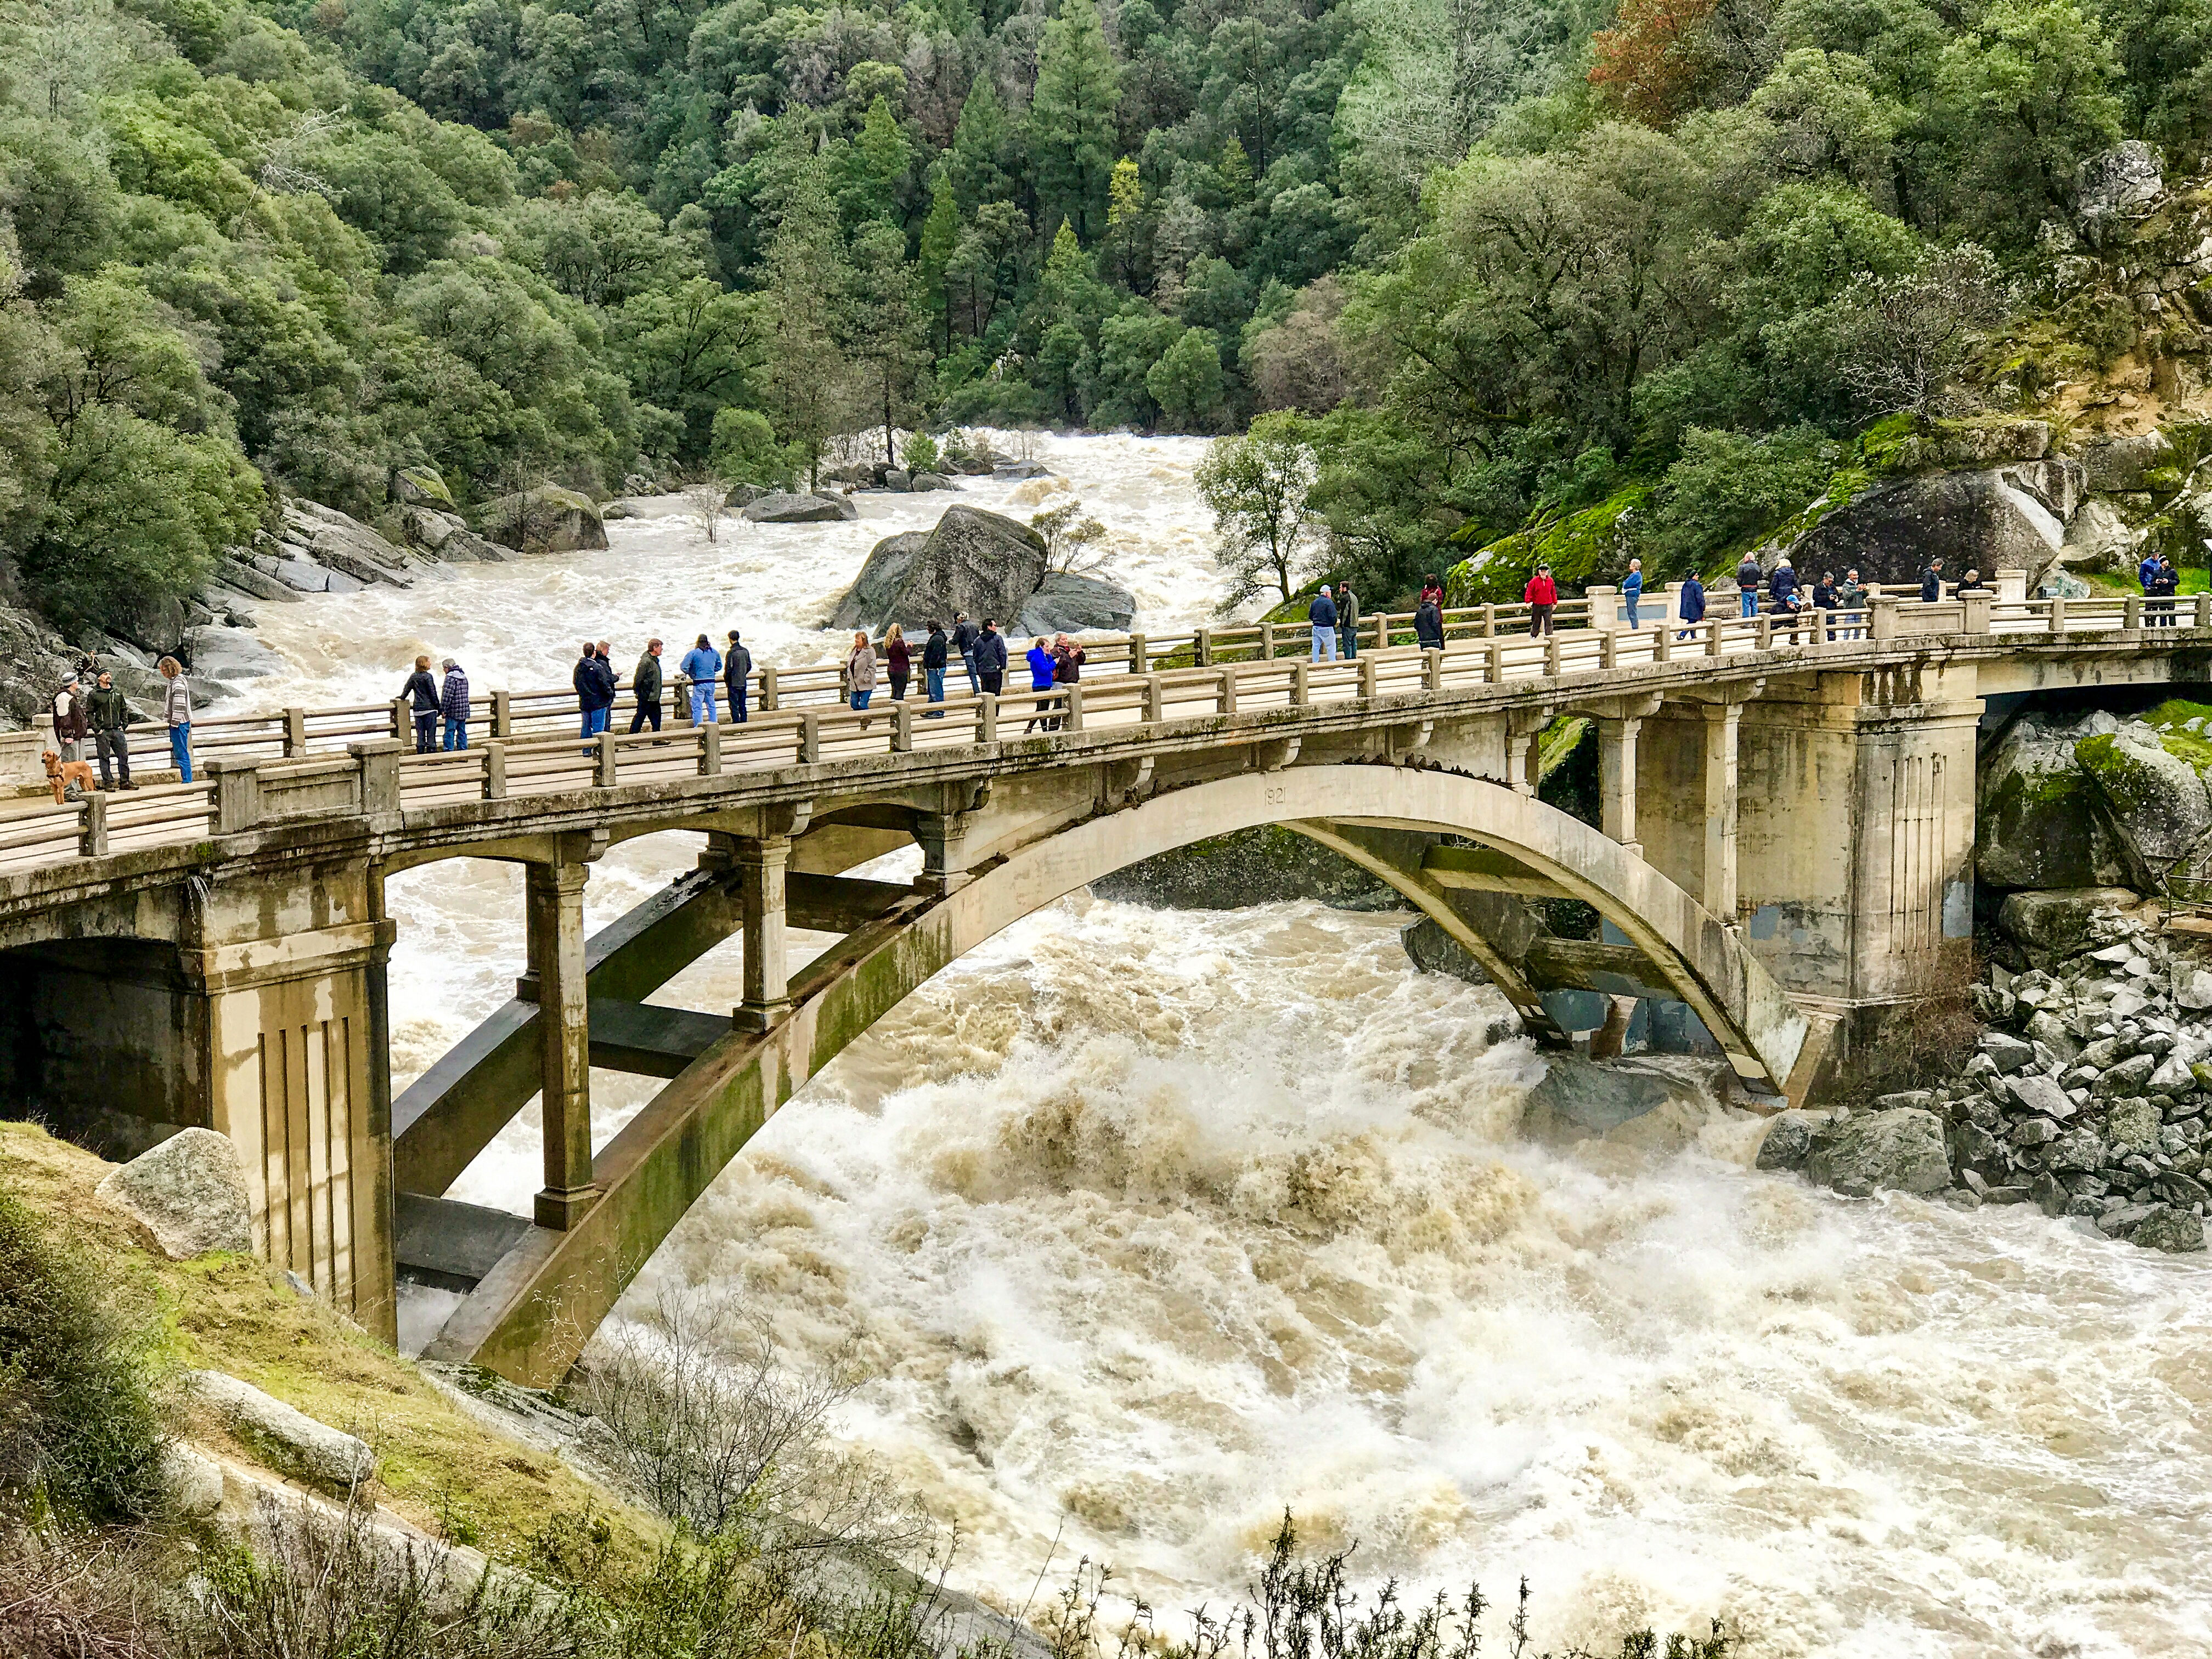 flooding along the South Fork of the Yuba River in California